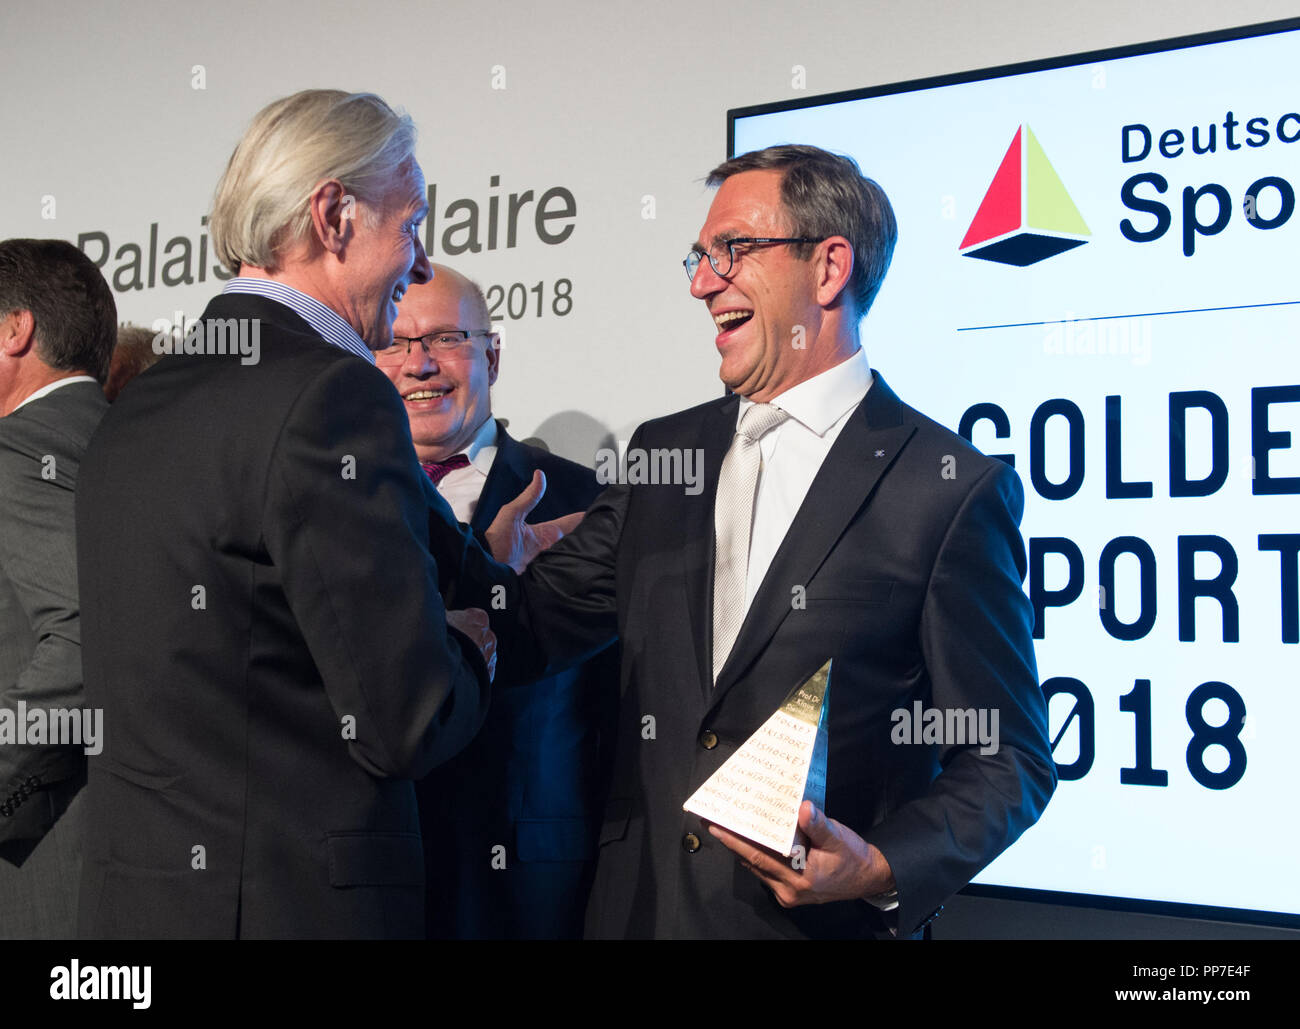 Dr. Roland MATTHES (swimming, prize winner 2004) congratulates Prof. Dr. med. Klaus STEINBACH (swimming, prize winner 2018) Behind: laudator Peter ALTMEIER (Federal Minister of Economics and Energy), awarding the Golden Sports Pyramid and awarding the Sports Fellowship 2018 in the PalaisPopulaire of Deutsche Bank in Berlin, Germany on 17.09.2018. | Usage worldwide Stock Photo